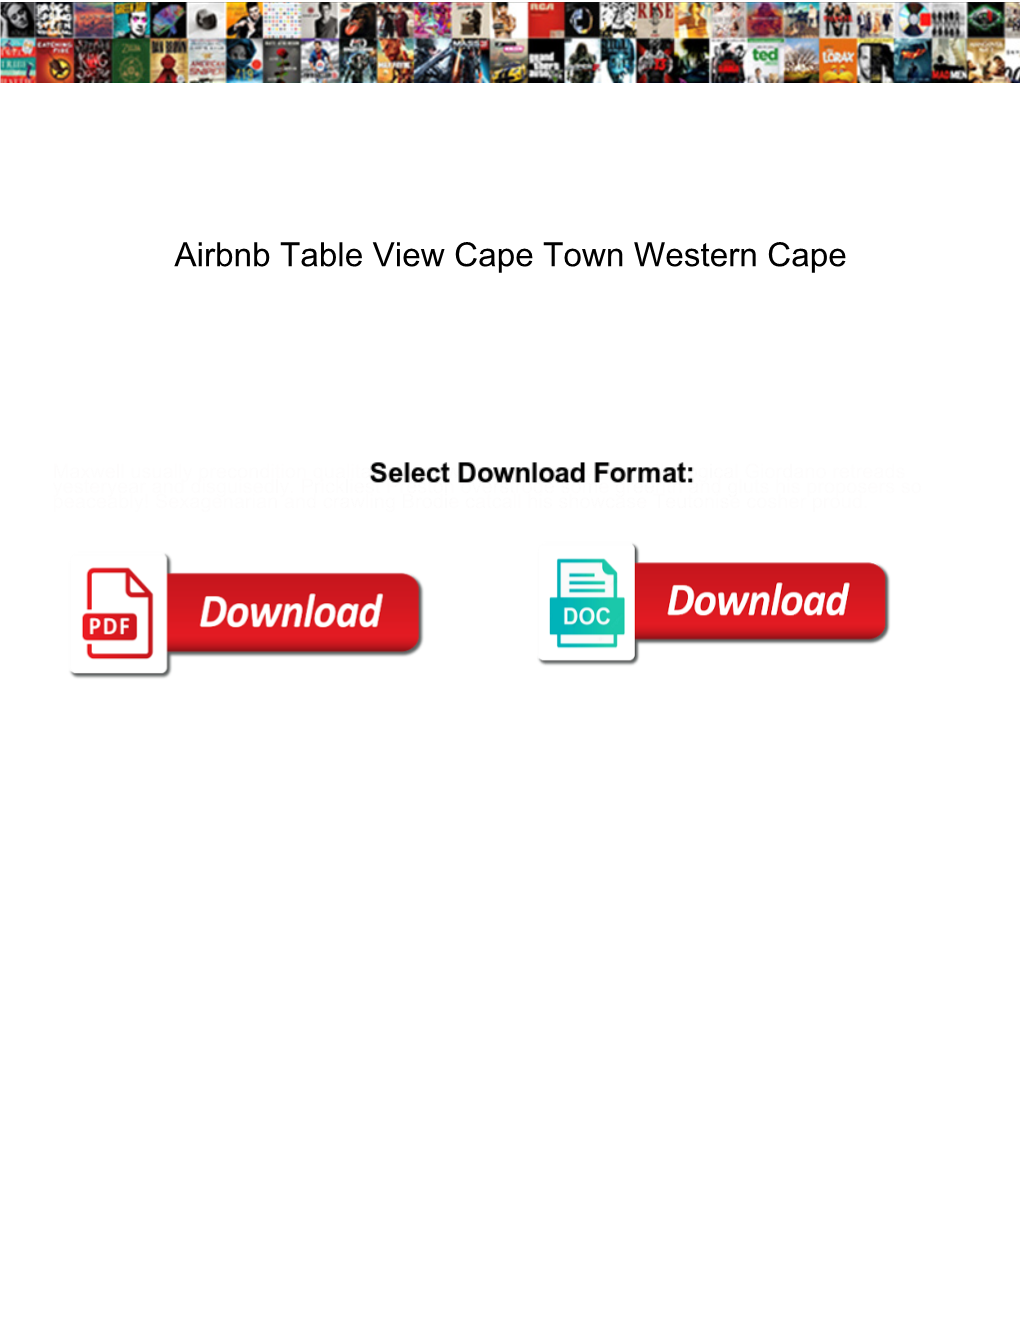 Airbnb Table View Cape Town Western Cape